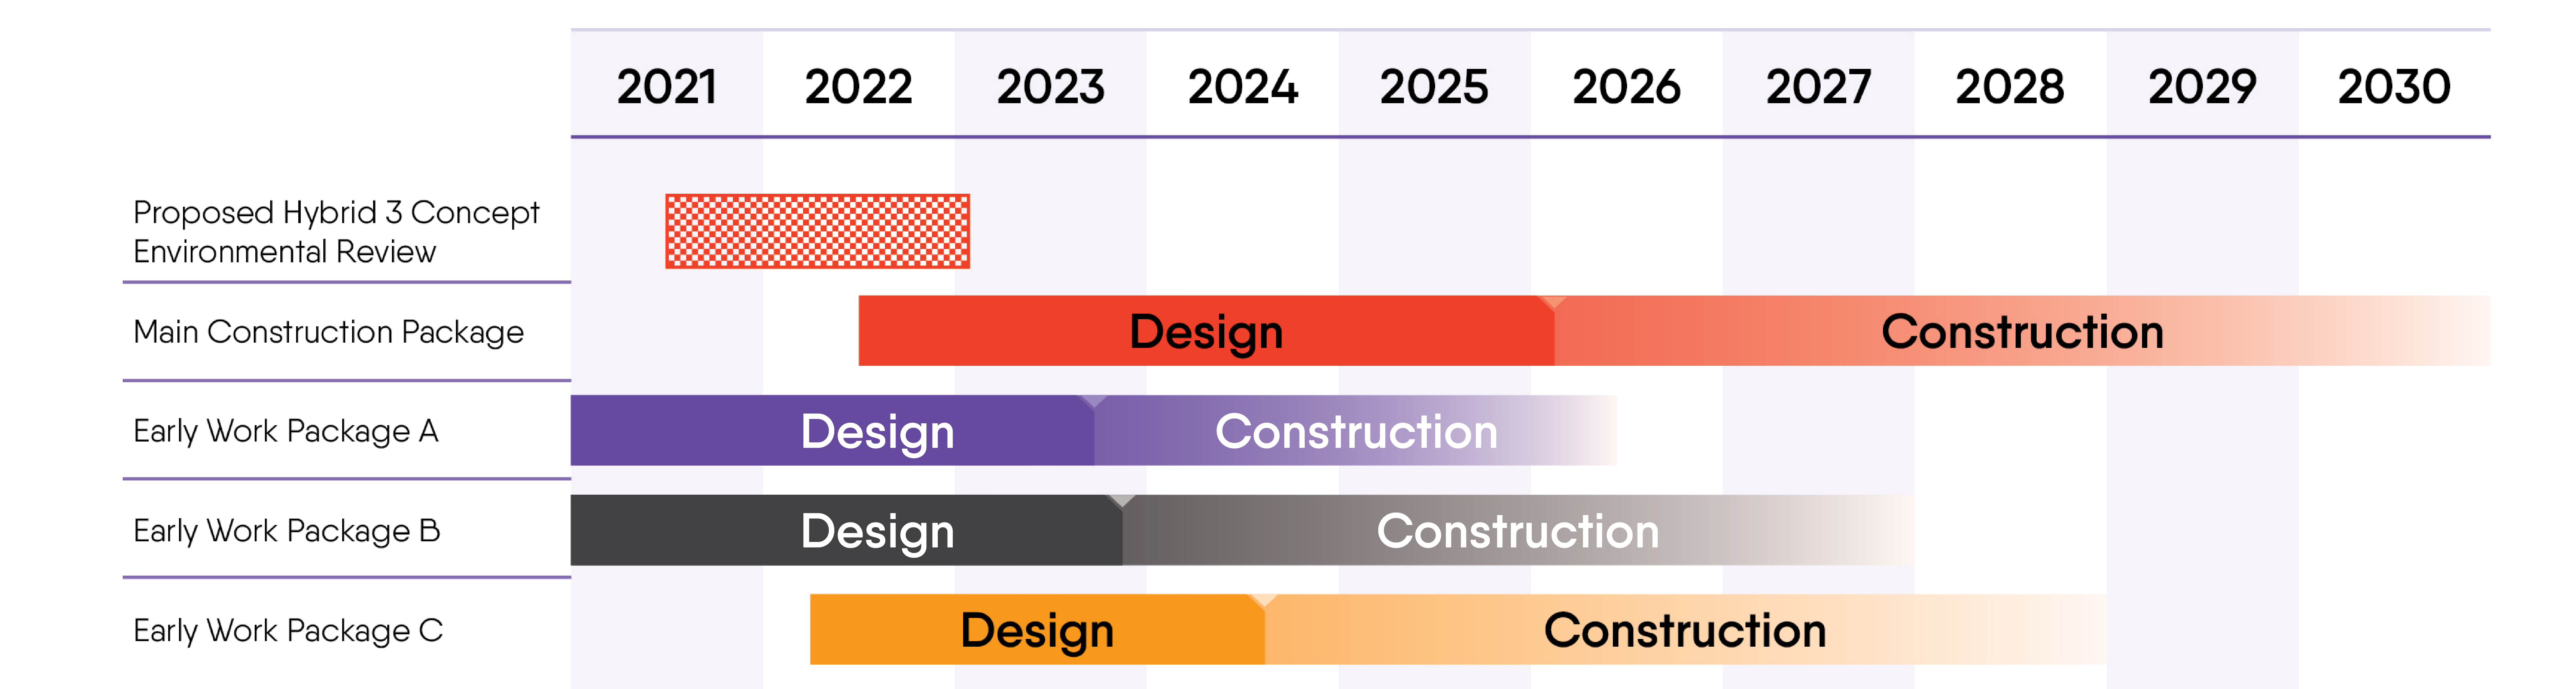 Timeline spanning 2021-2030. Proposed Hybrid 3 Concept Environmental Review 2021-2022; Main Construction Package Design 2022-2205; Main Construction Package Construction 2025-2029; Early Work Package A Design 2021-2023; Work Package A Construction 2023-2026; Early Work Package B Design 2021-2023; Work Package B Construction 2023-2026; Early Work Package C Design 2022-2024; Work Package C Construction 2024-2026;